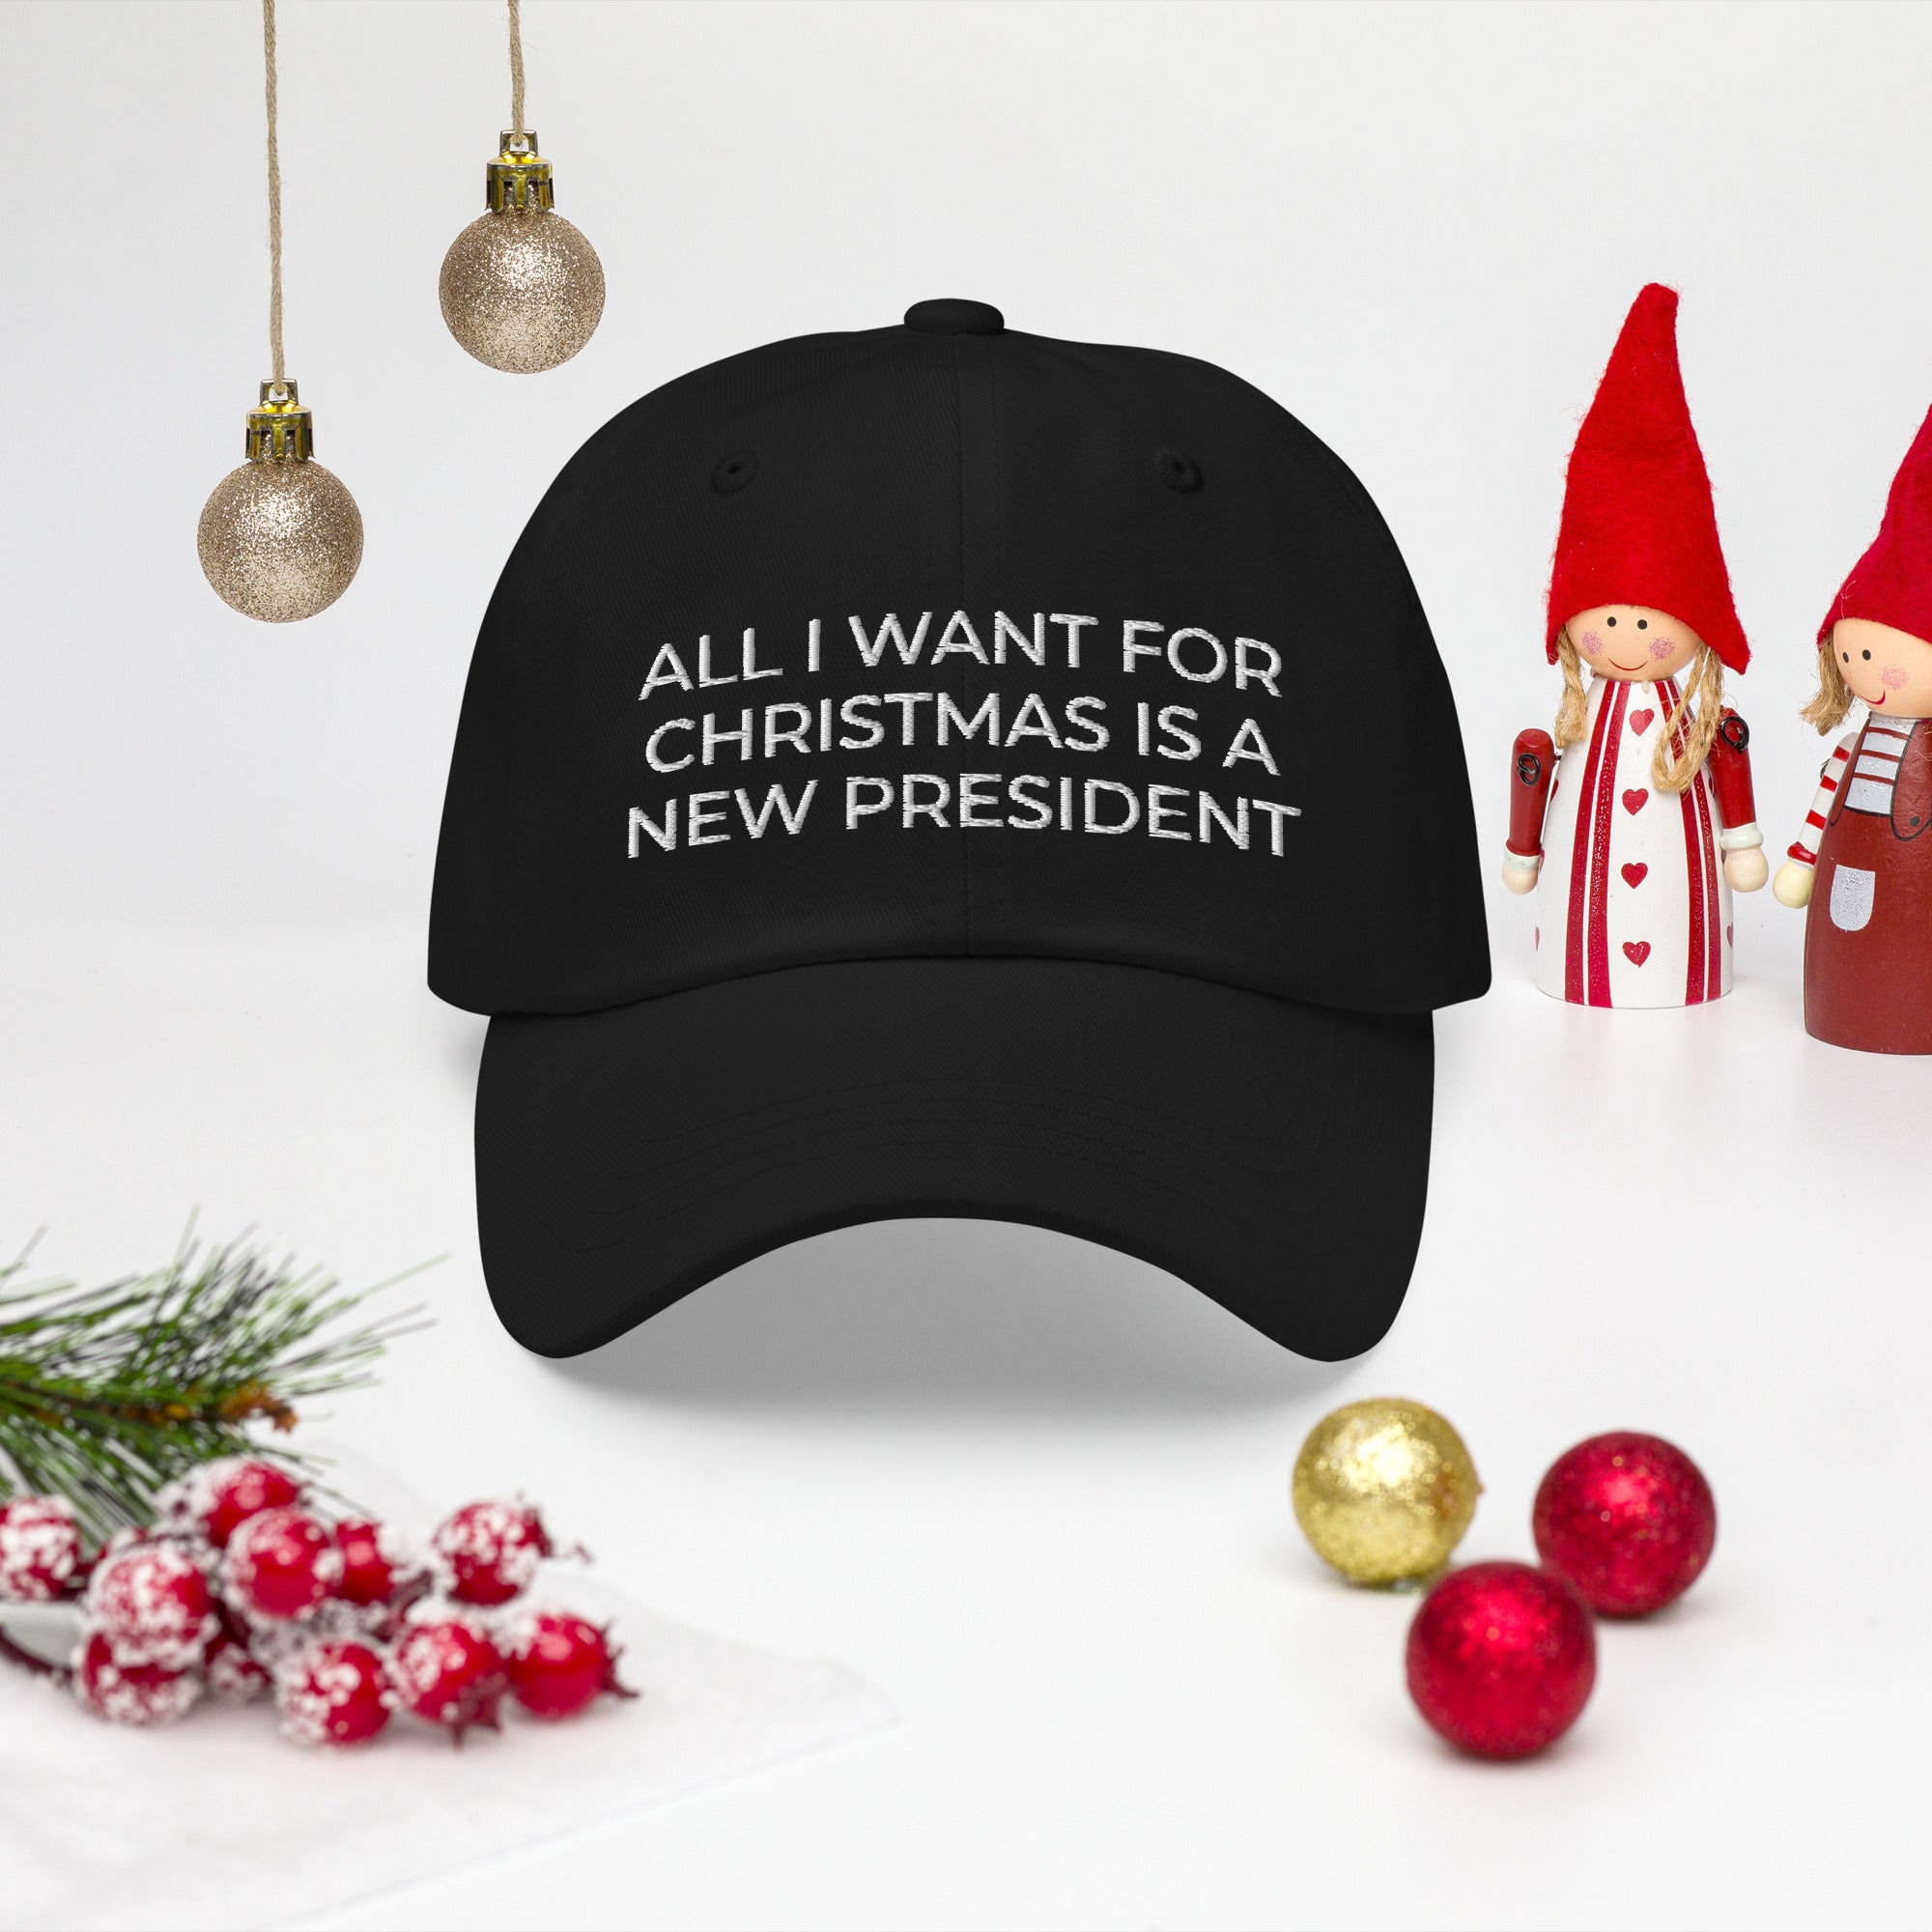 All I Want For Christmas Is A New President, FJB Christmas Hat, Anti Biden Christmas Cap, Conservative Hat, FJB Hat, Patriot Xmas Hat - Madeinsea©